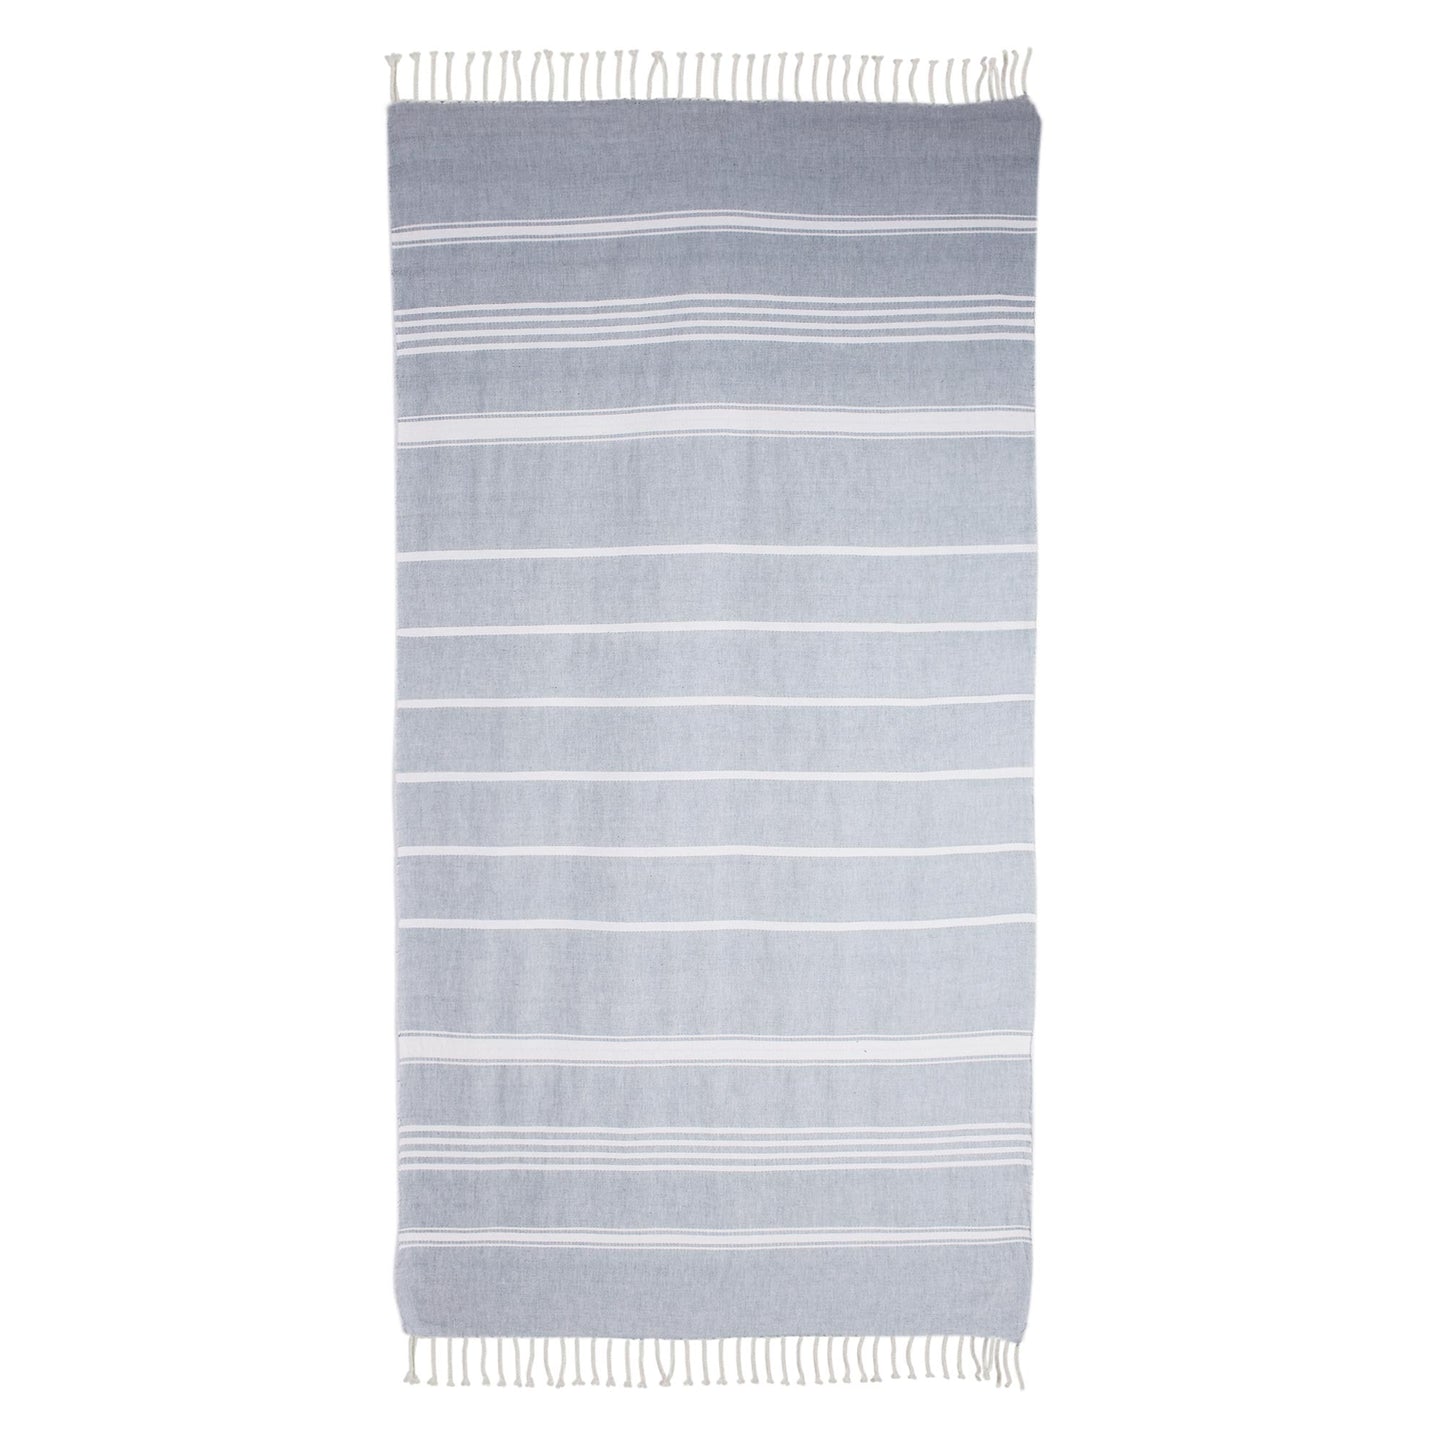 Fresh Relaxation in Celadon Striped Cotton Beach Towel in Celadon from Guatemala